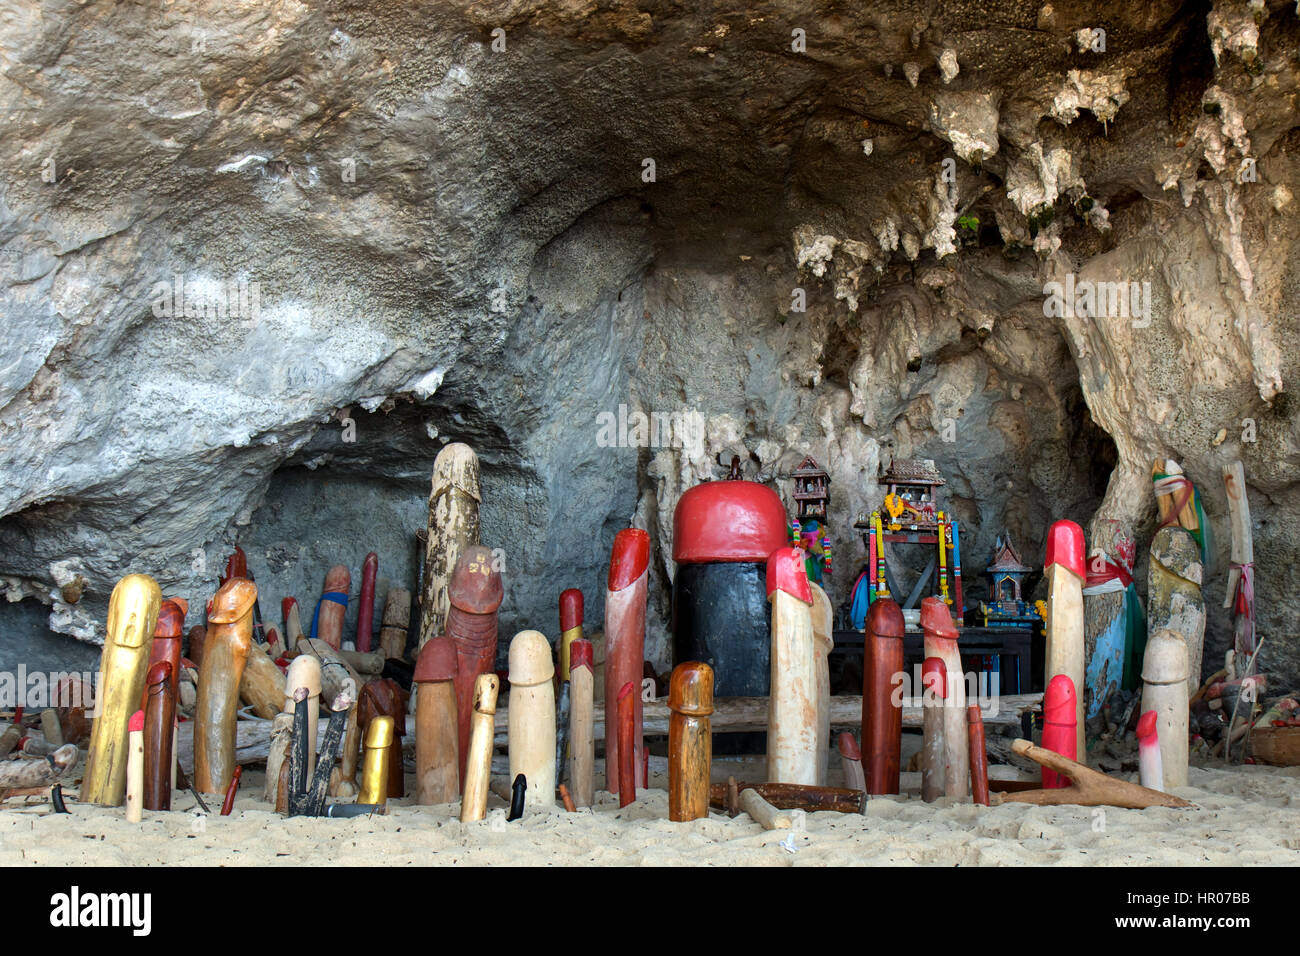 Wooden penis in Princess cave (Phra Nang Shrine Temple). South Railay beach in Krabi. Thailand. Stock Photo